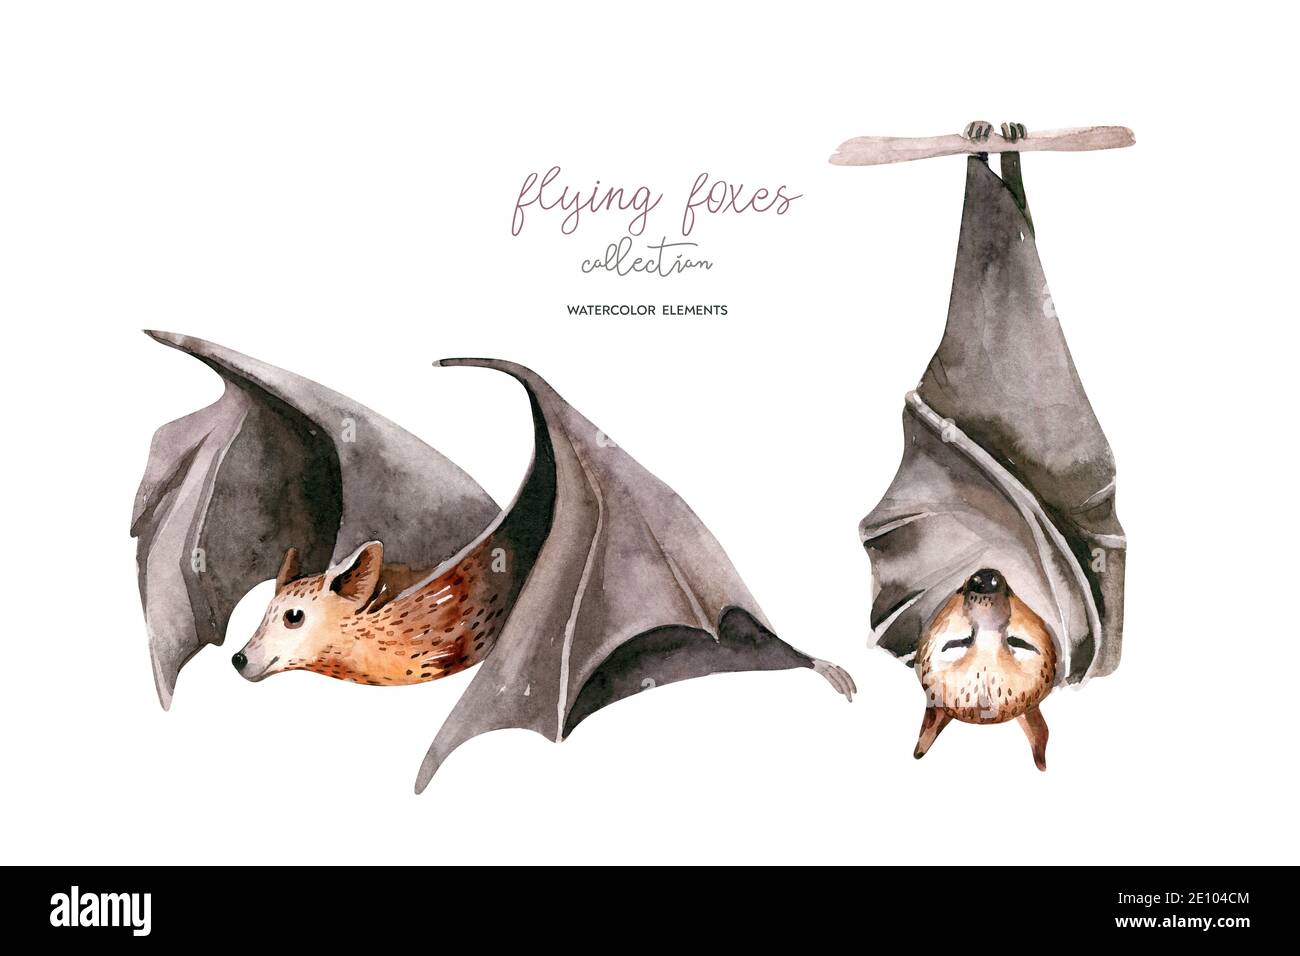 Watercolor flyinf fox. Sleeping black fruit bat hanging on on tree branch and flying bar. Nursery illustration. White background. Stock Photo